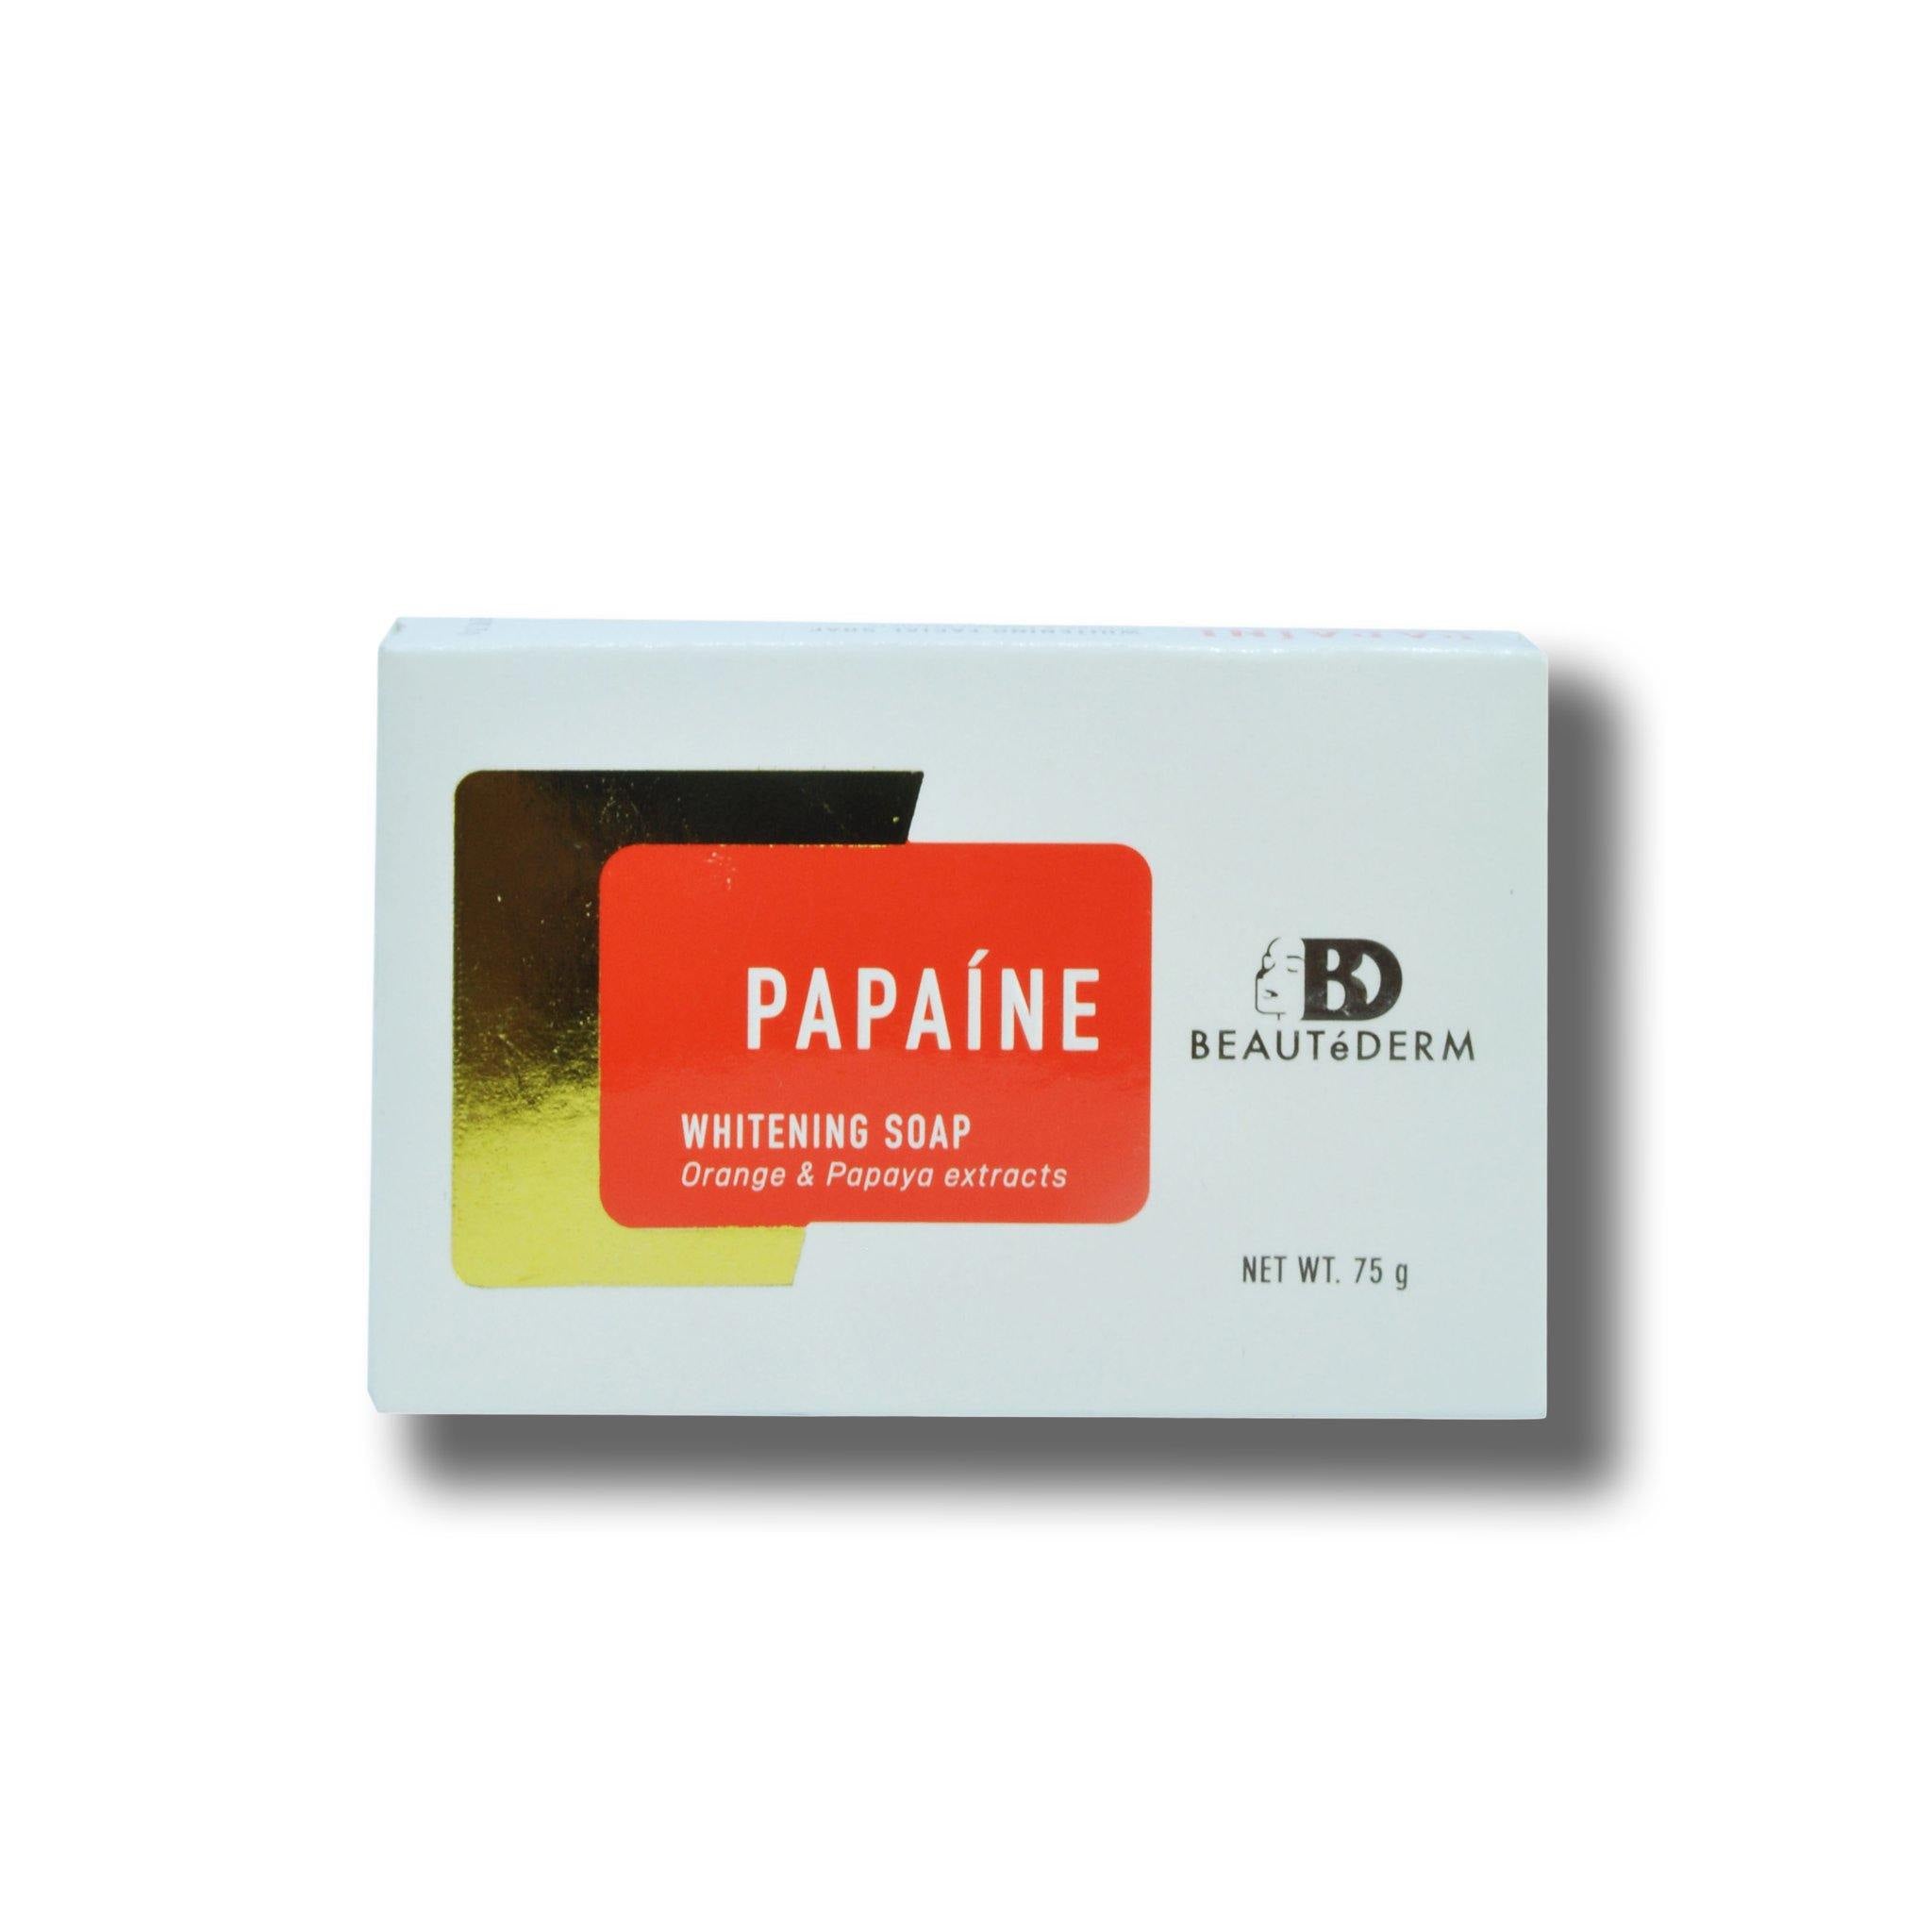 Papaine Whitening Soap, with Orange & Papay Extracts, 75g, by Beautederm